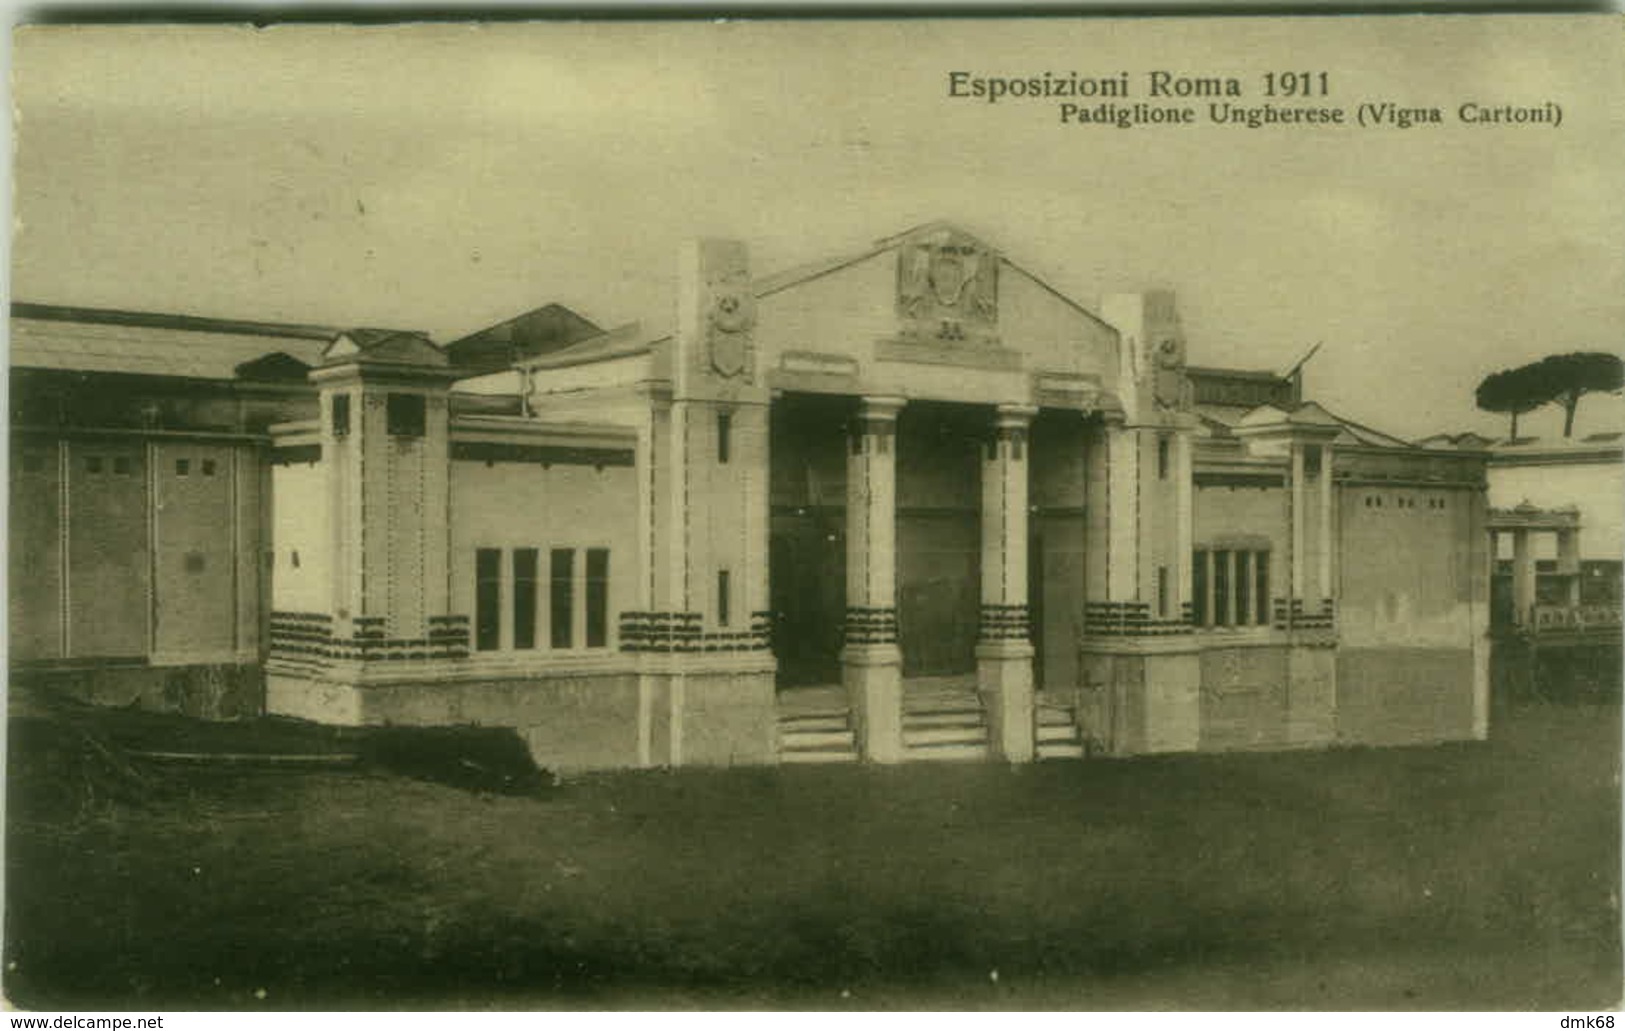 ROMA - ESPOSIZIONE 1911 - PADIGLIONE UNGHERESE - HUNGARY PAVILION (3168) - Expositions